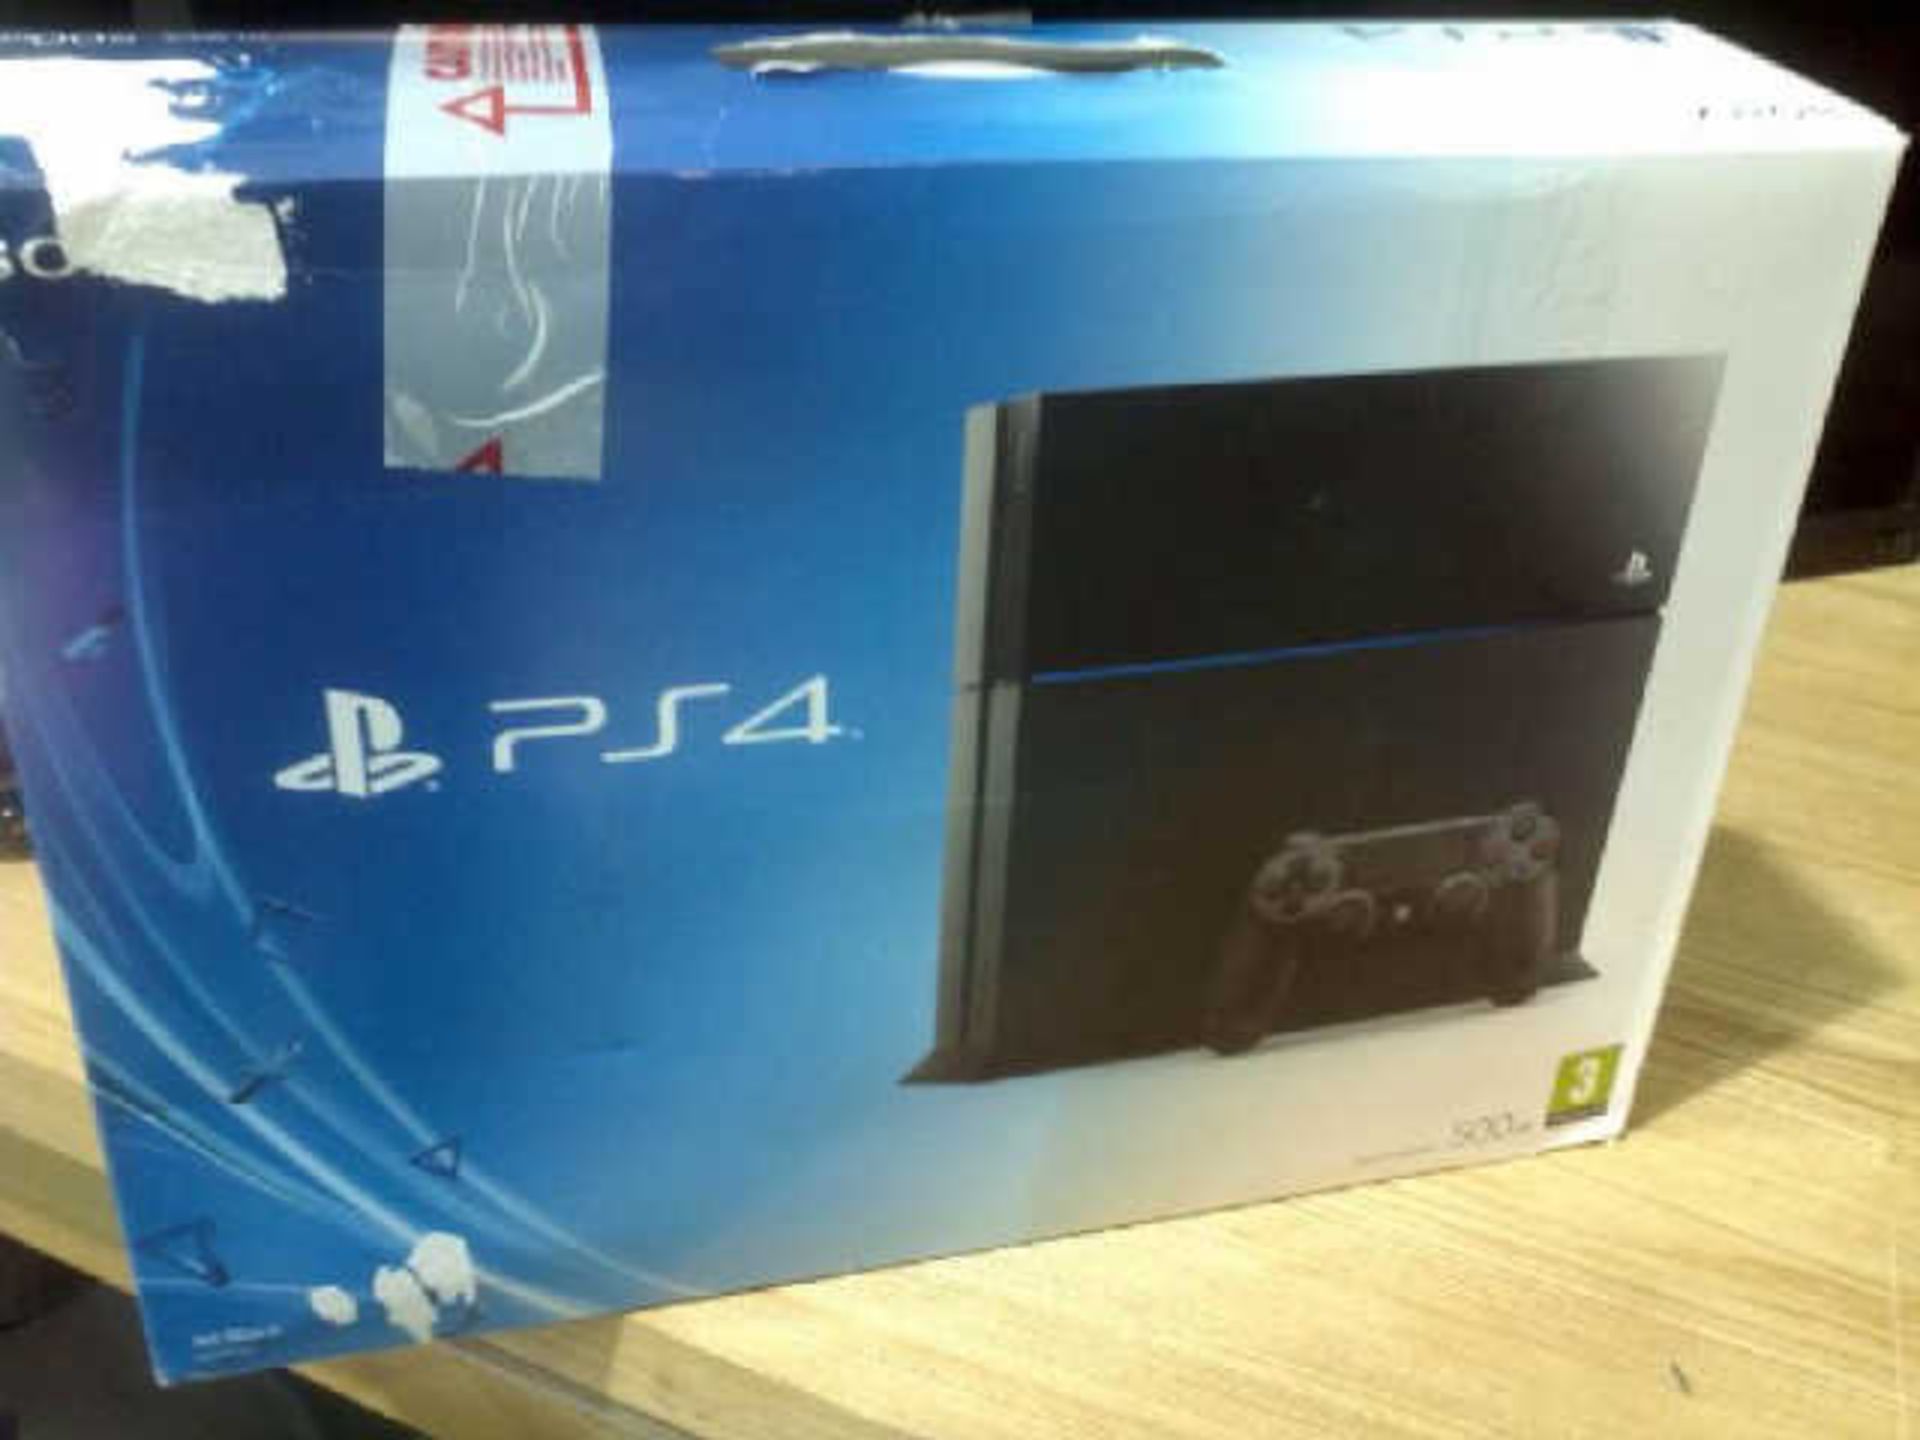 BOXED SONY PLAYSTATION 4 500GB GAMES CONSOLE